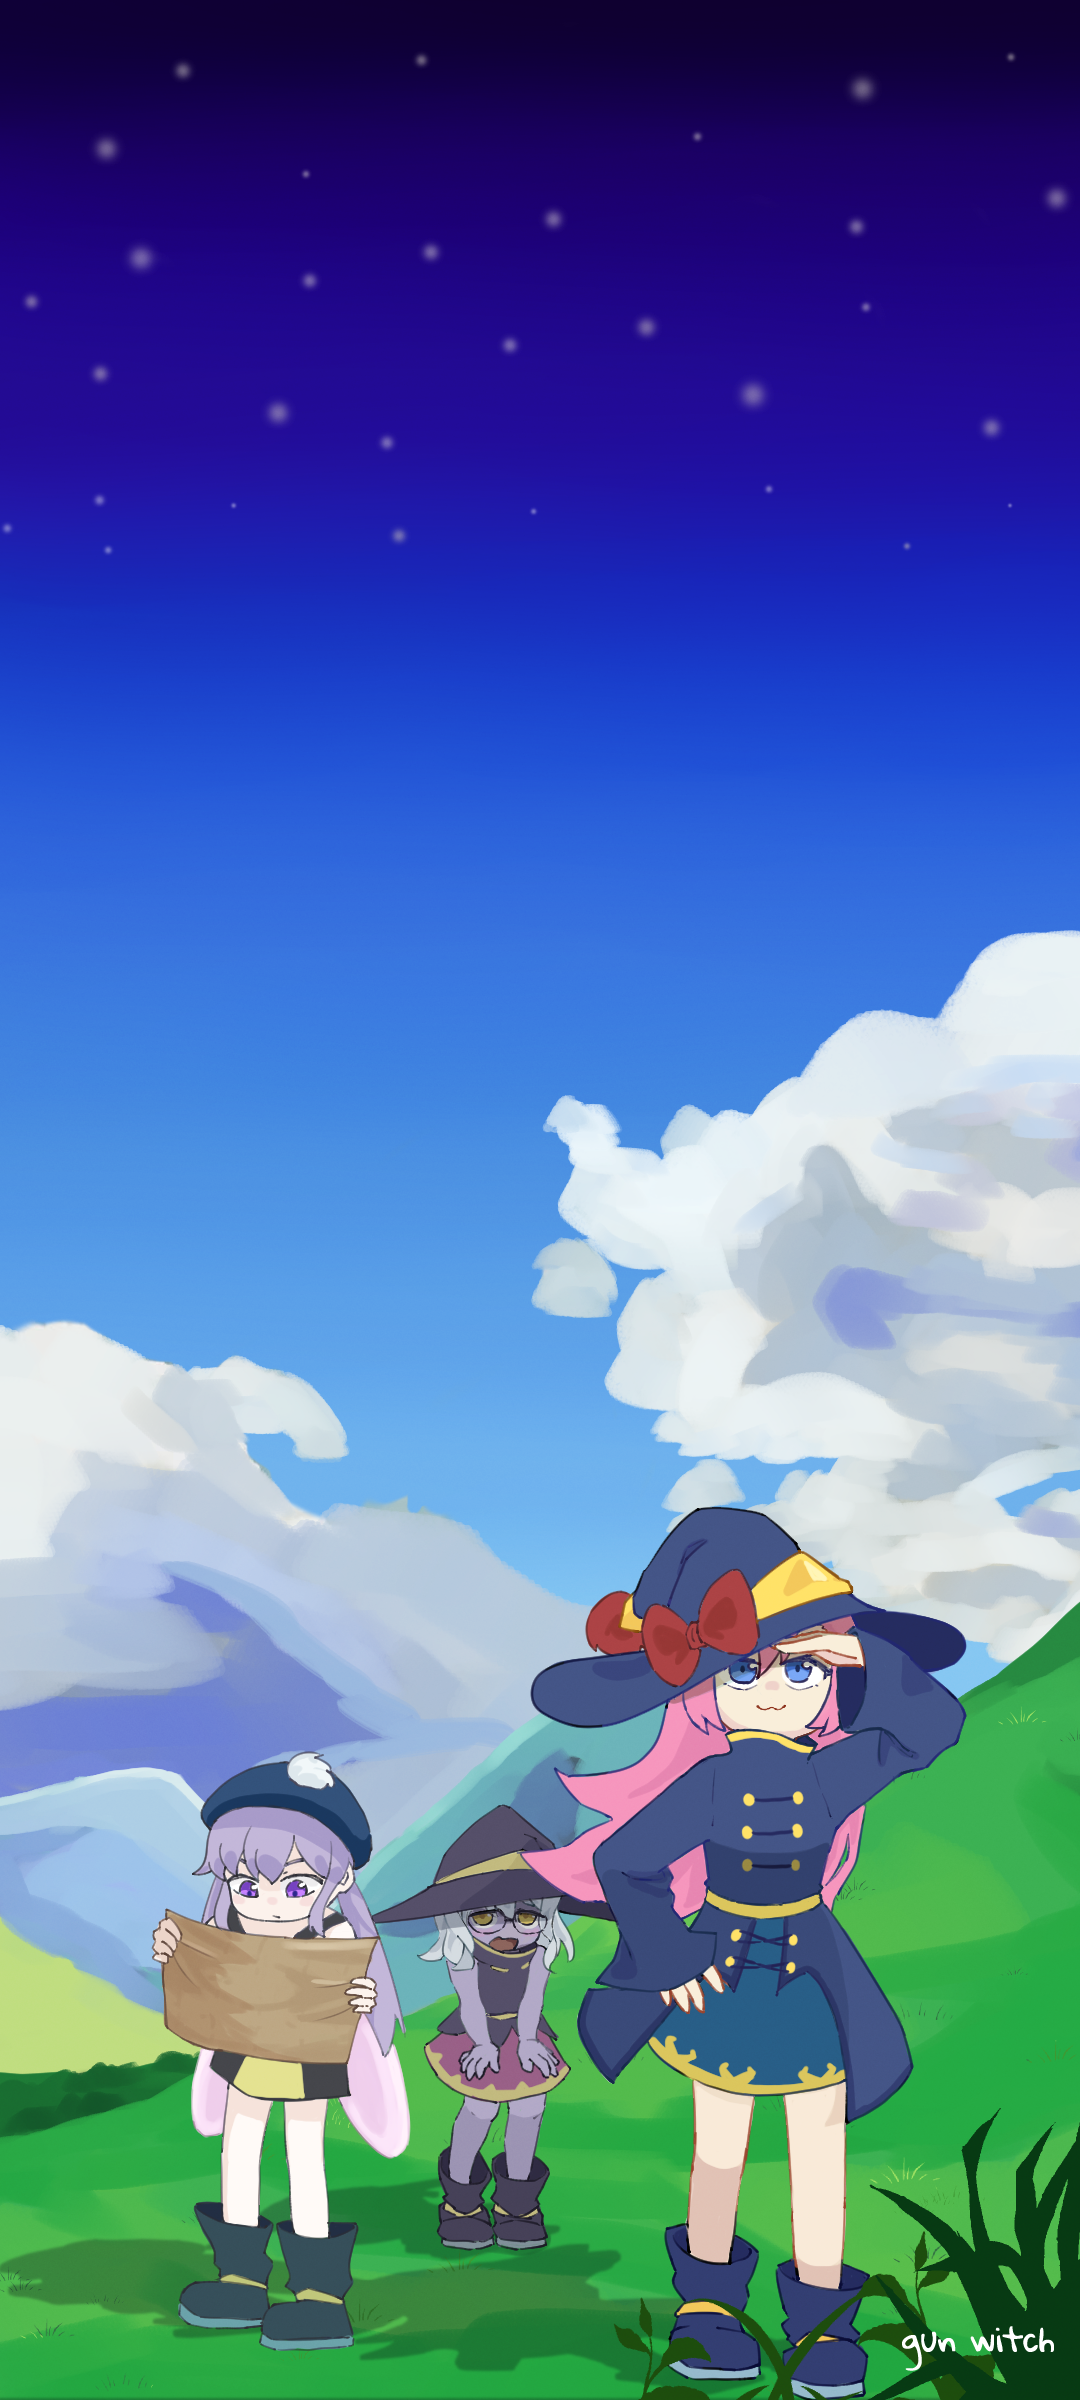 Anime 1080x2400 gun_witch nature adventurers colorful mountains anime girls looking away leaves signature smiling glasses women with glasses outdoors women outdoors portrait display standing sky clouds stars map hat witch hat hair between eyes tired grass